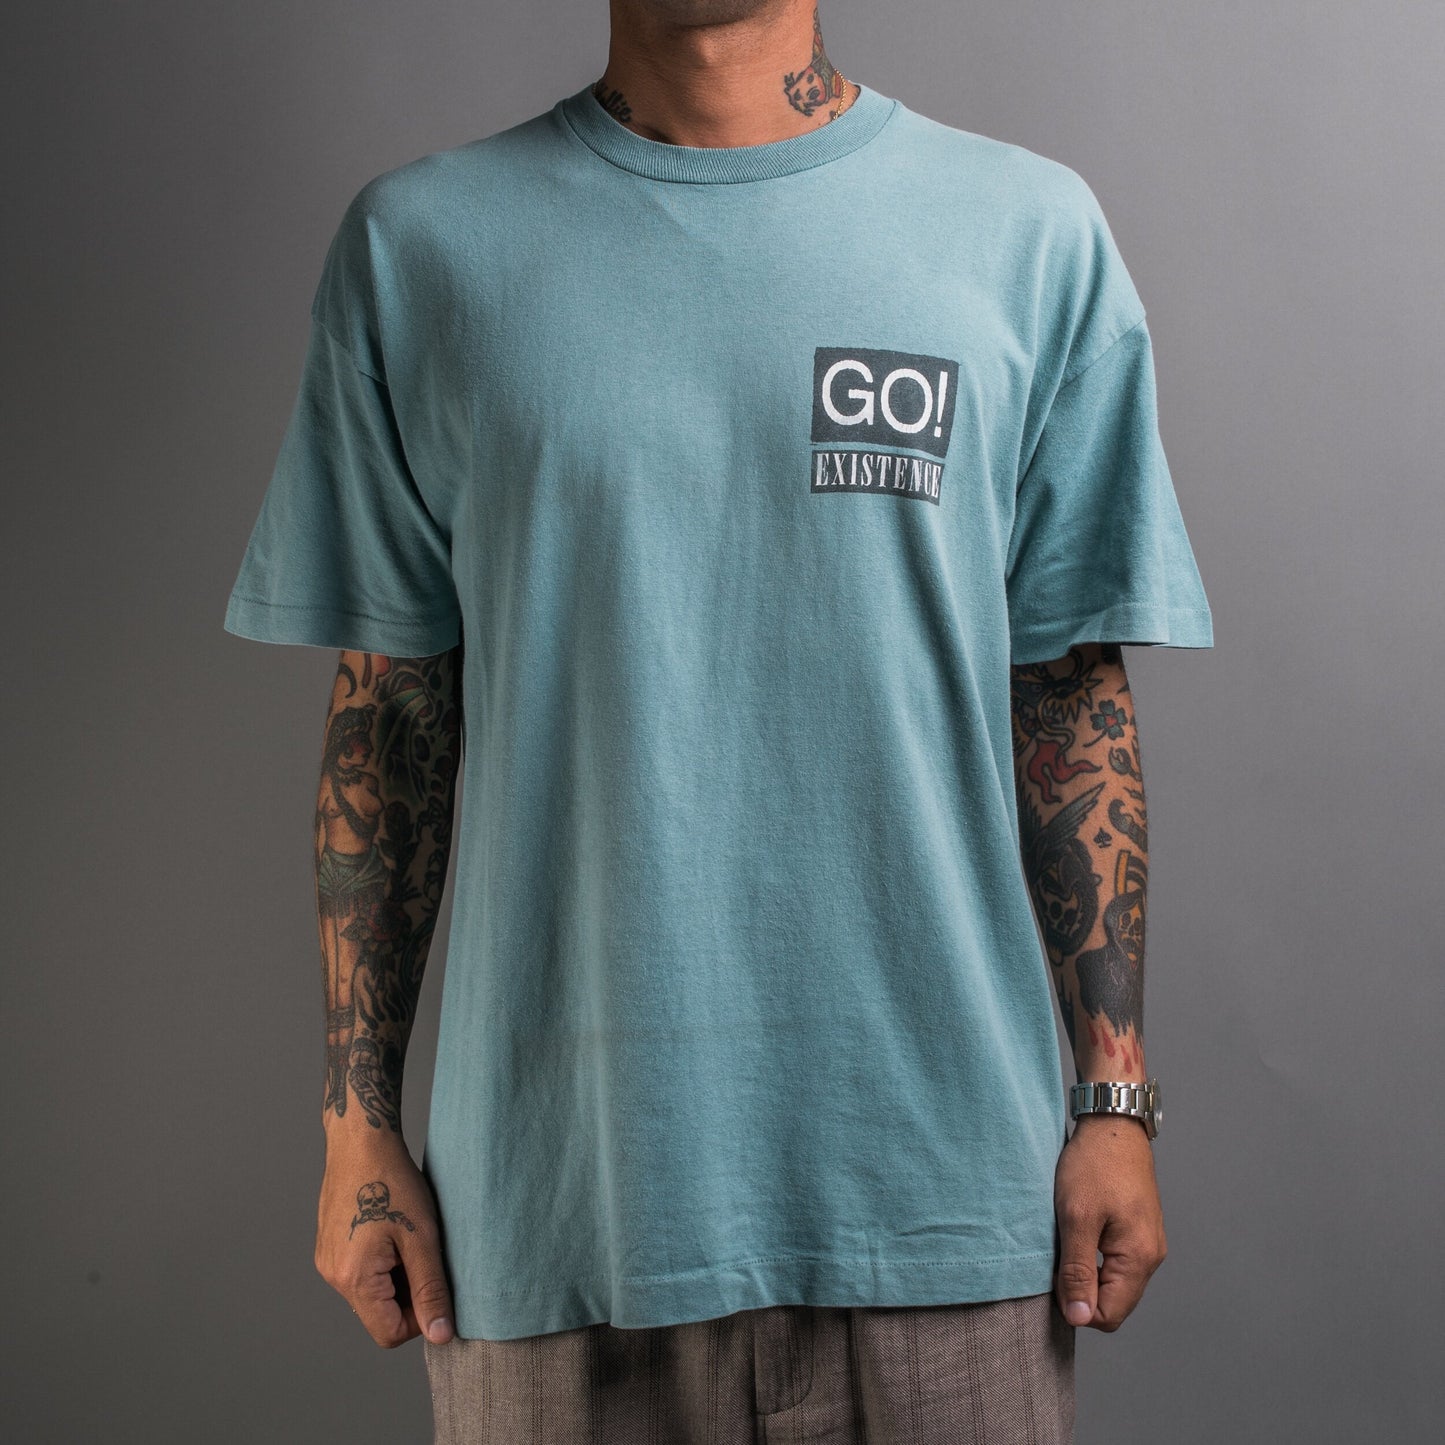 Vintage 90’s Go! Existence T-Shirt